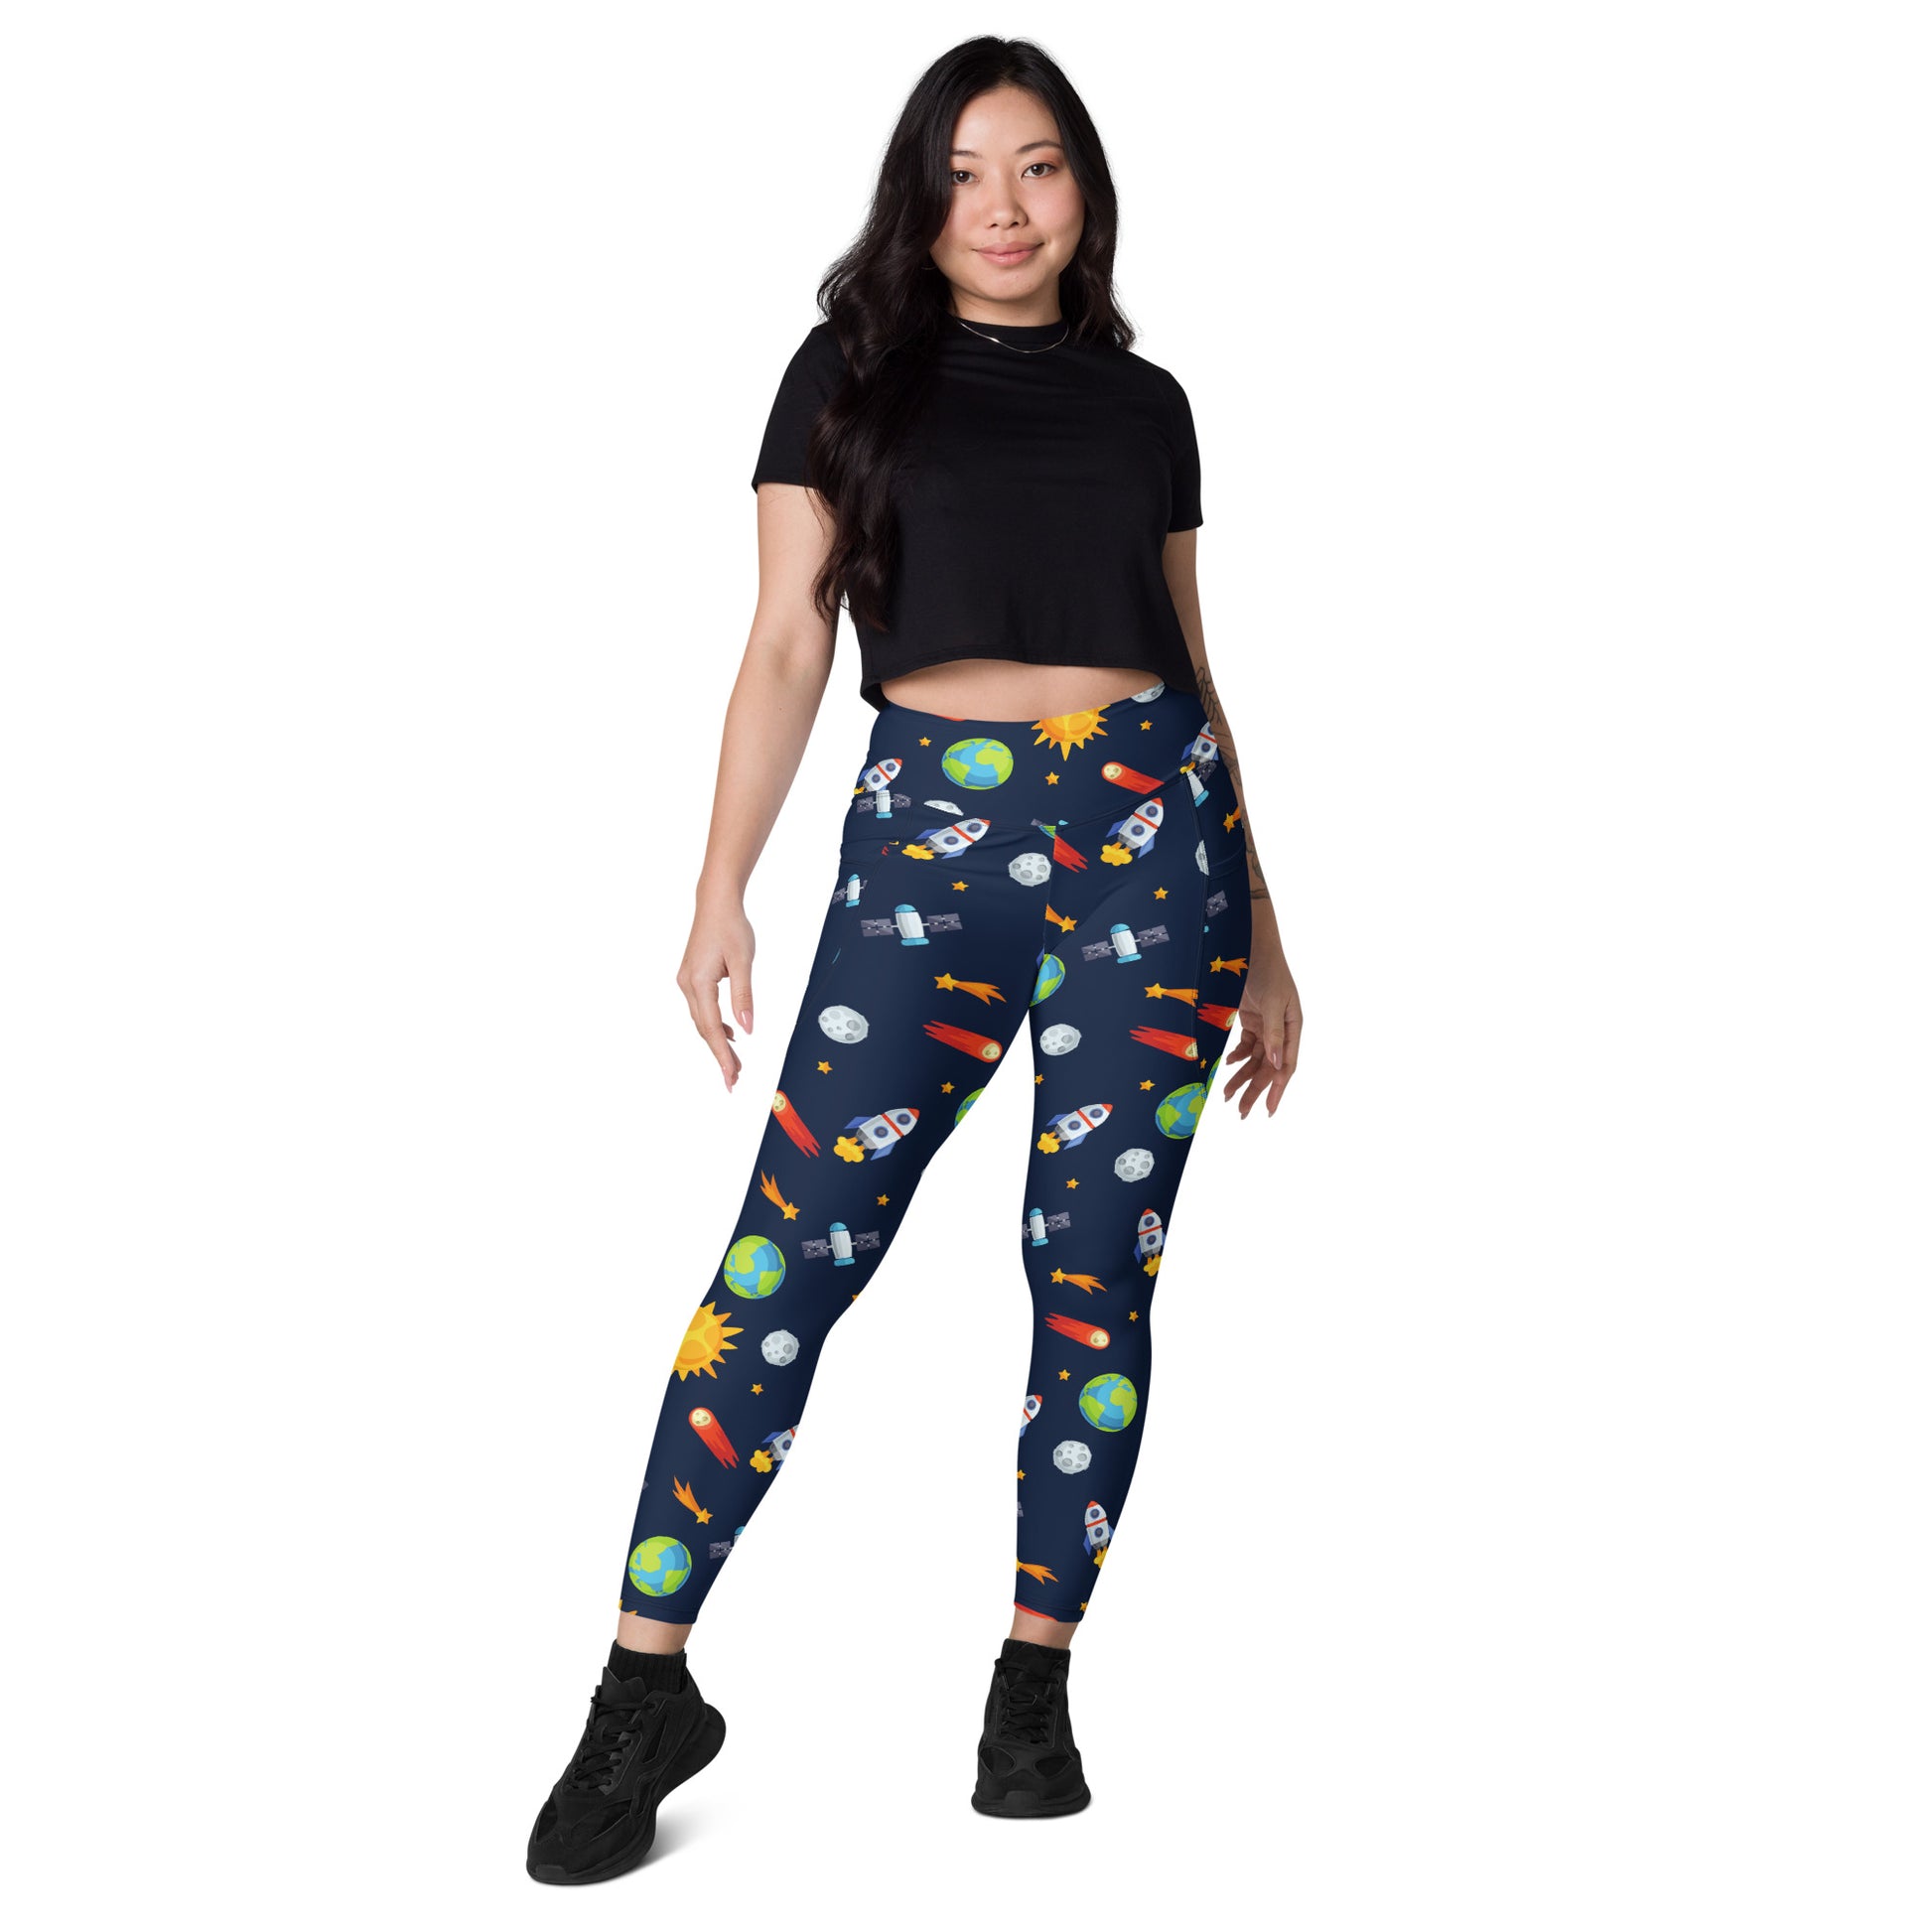 Busy Space - Leggings with pockets, 2XS - 6XL Leggings With Pockets 2XS - 6XL (US)